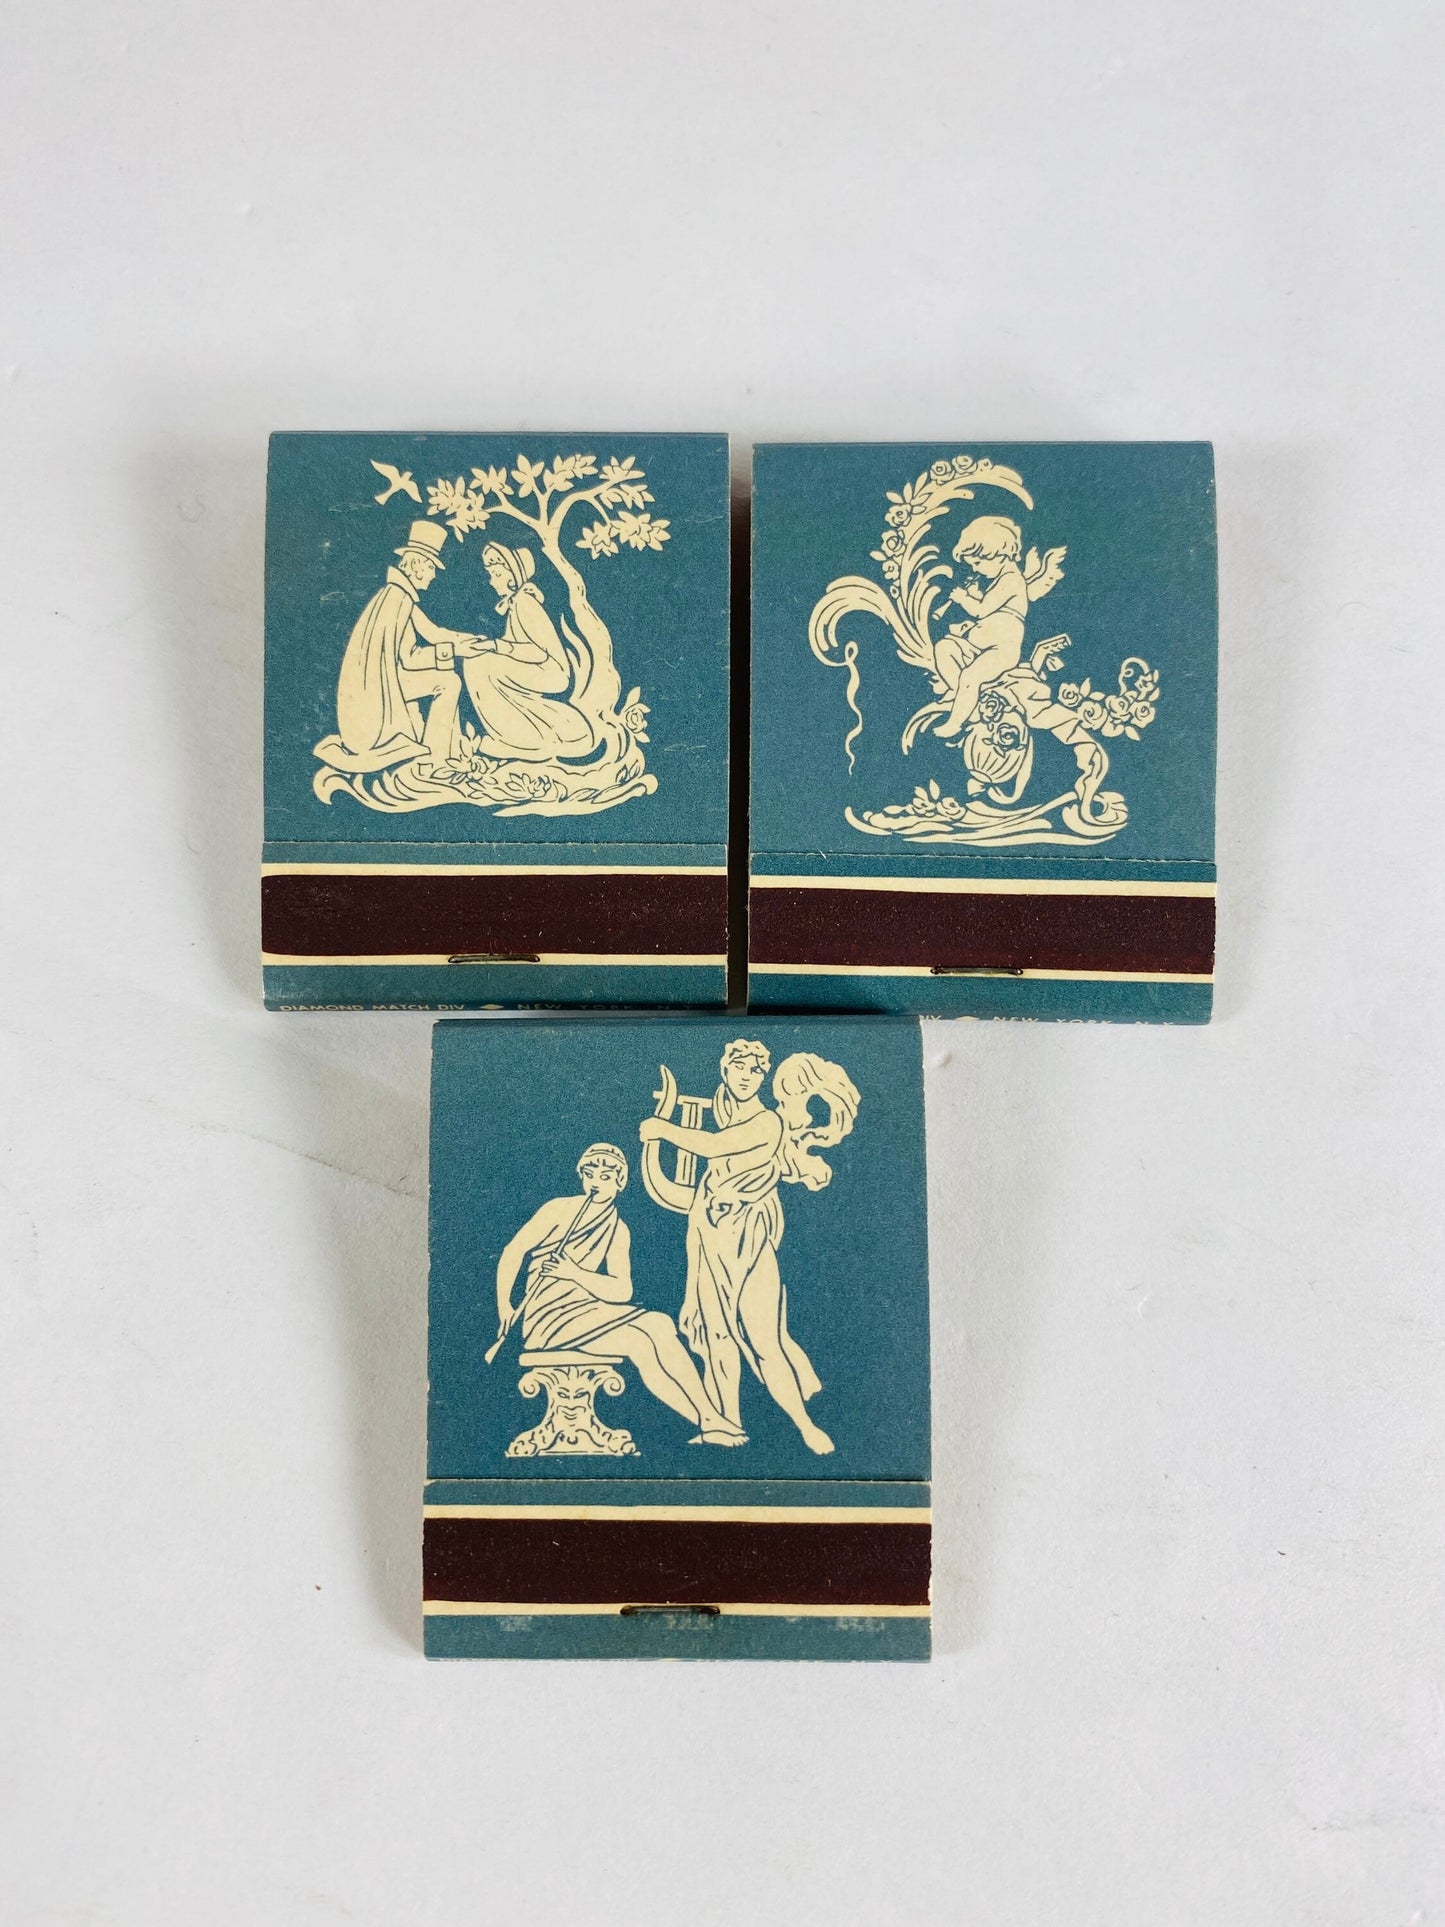 1970 Vintage Diamond Matches lot 3 UNUSED blue & white angelic cottagecore pocket sized Home decor gift candles lighter greek statues